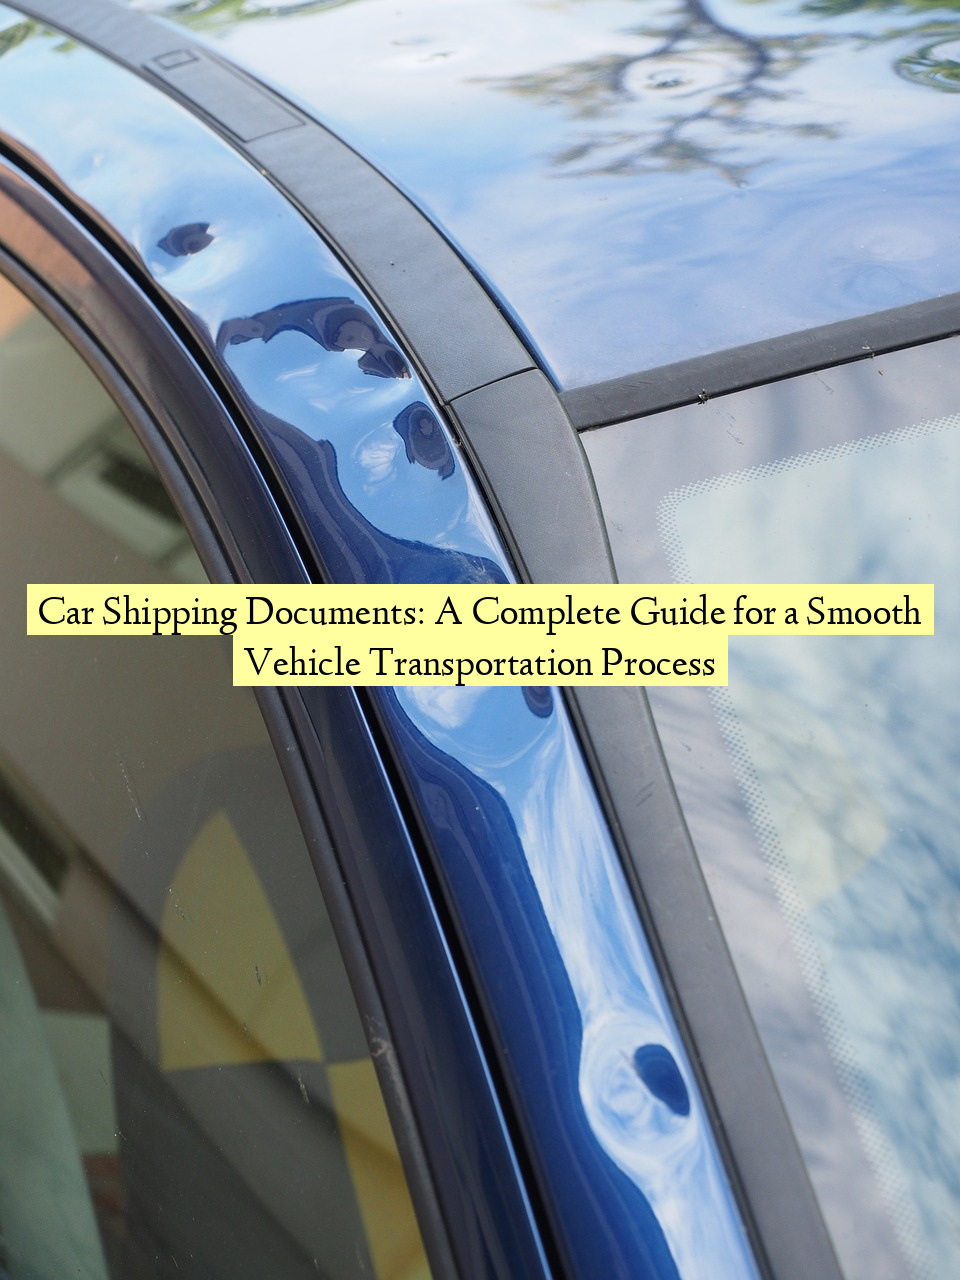 Car Shipping Documents: A Complete Guide for a Smooth Vehicle Transportation Process